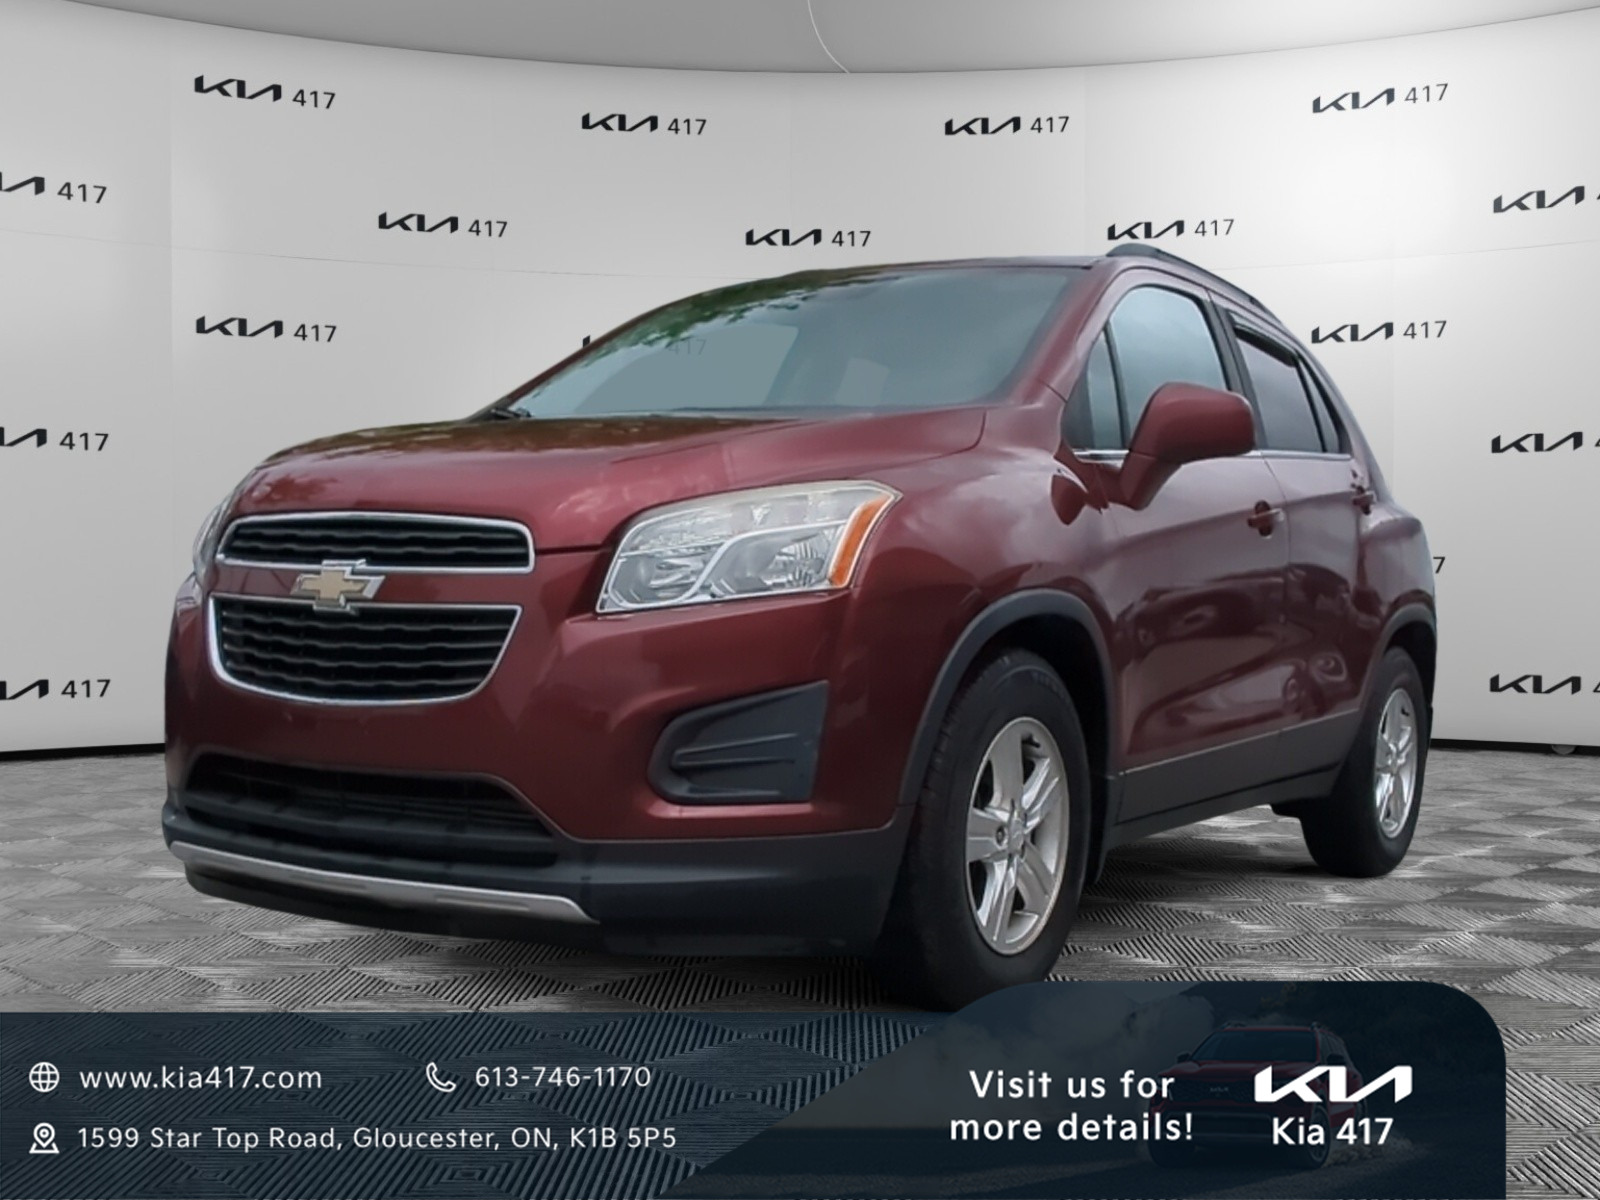 2013 Chevrolet Trax 1LT FRONT WHEEL DRIVE | NO ACCIDENTS |